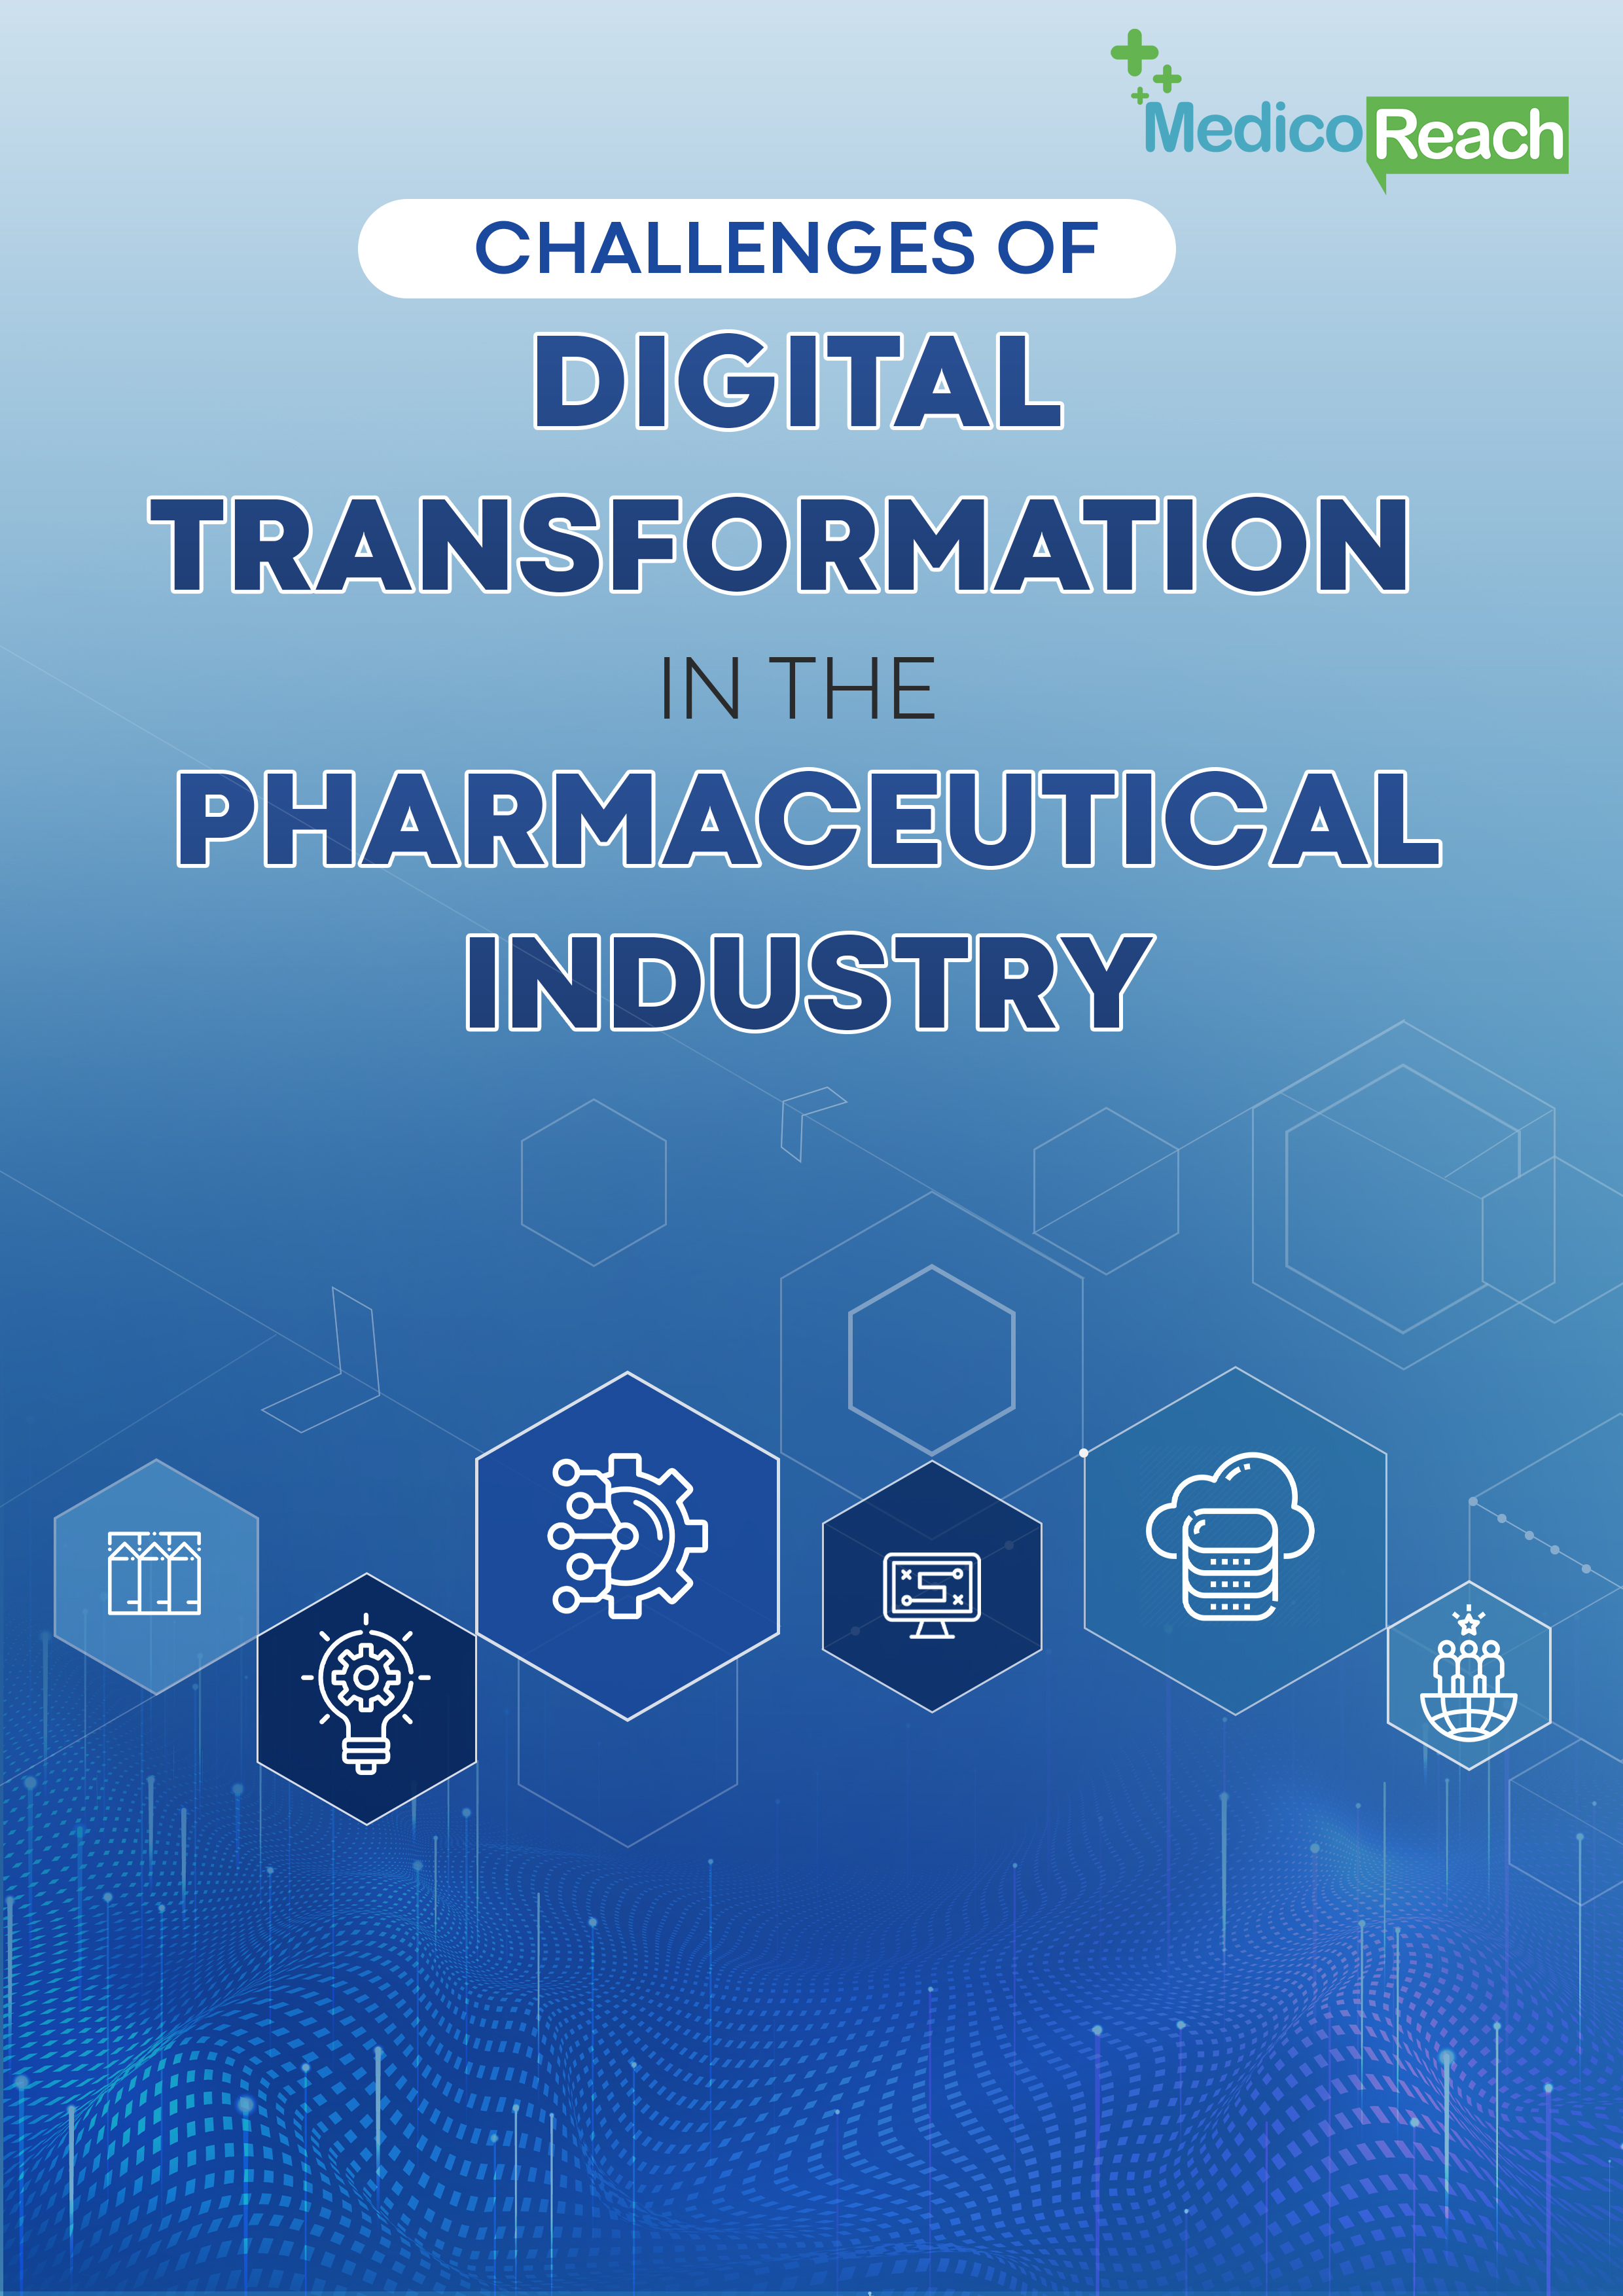 Challenges of Digital Transformation in the Pharmaceutical Industry